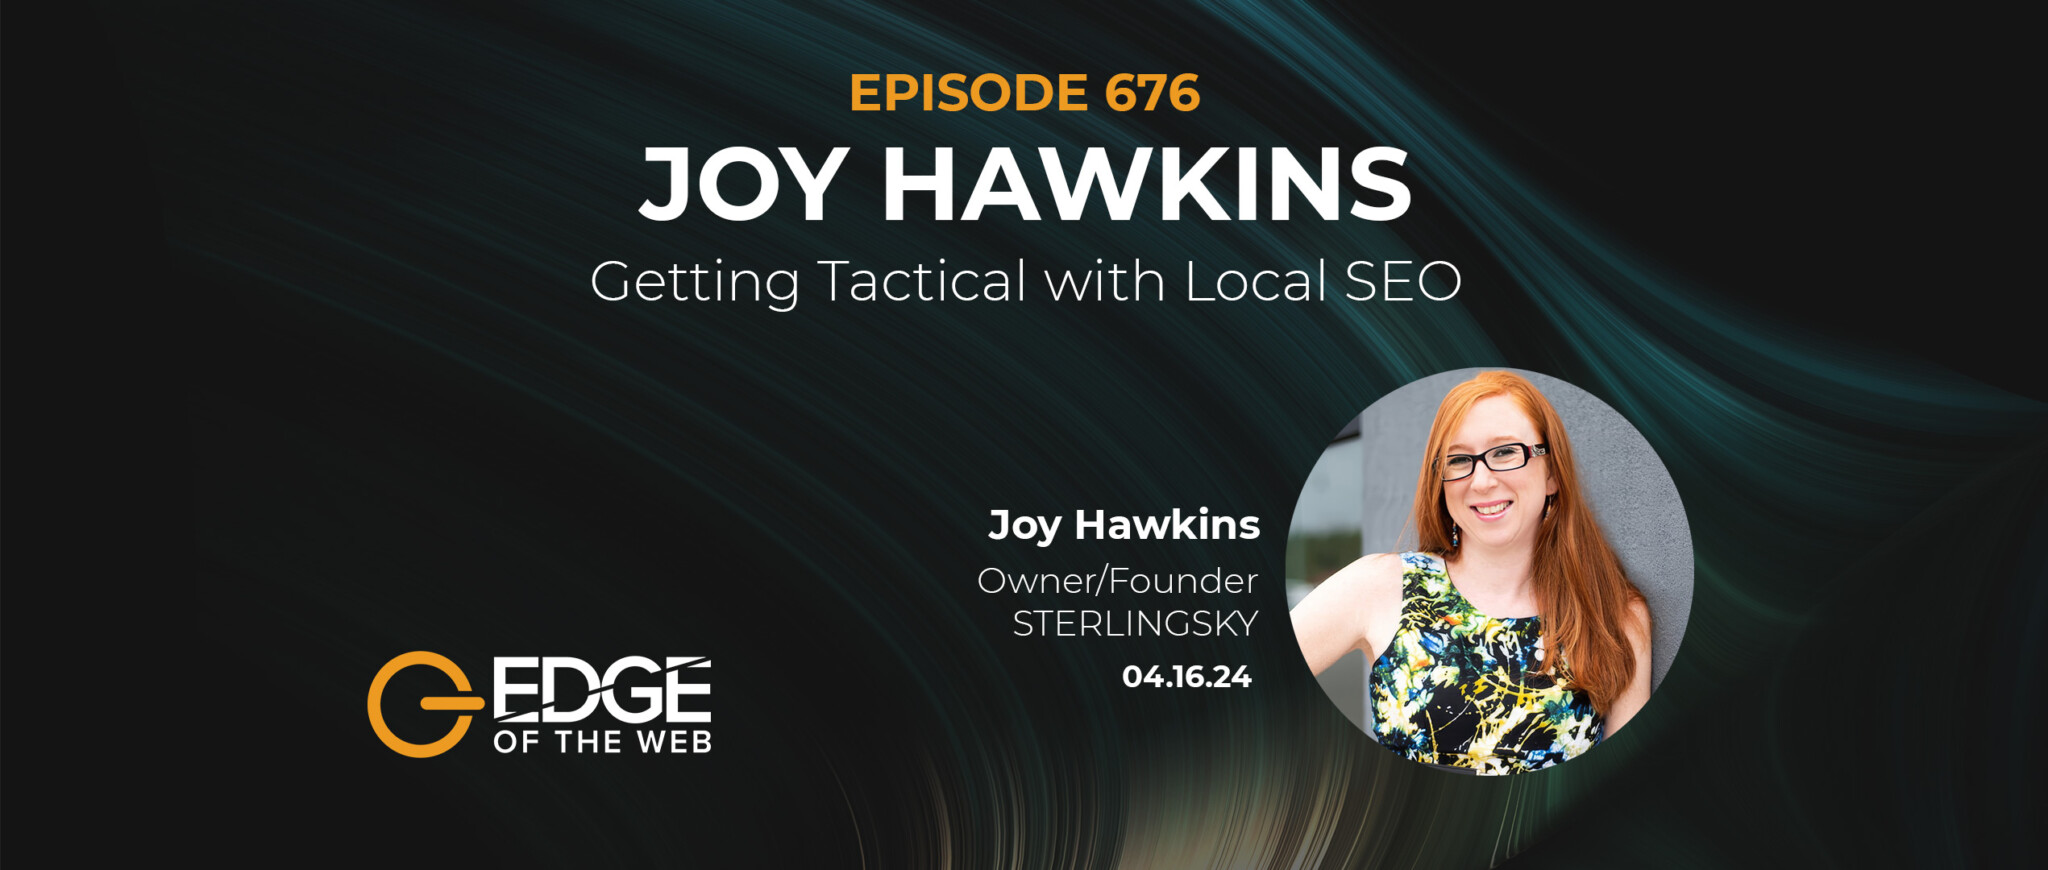 Episode 676: Getting Tactical with Local SEO with Joy Hawkins